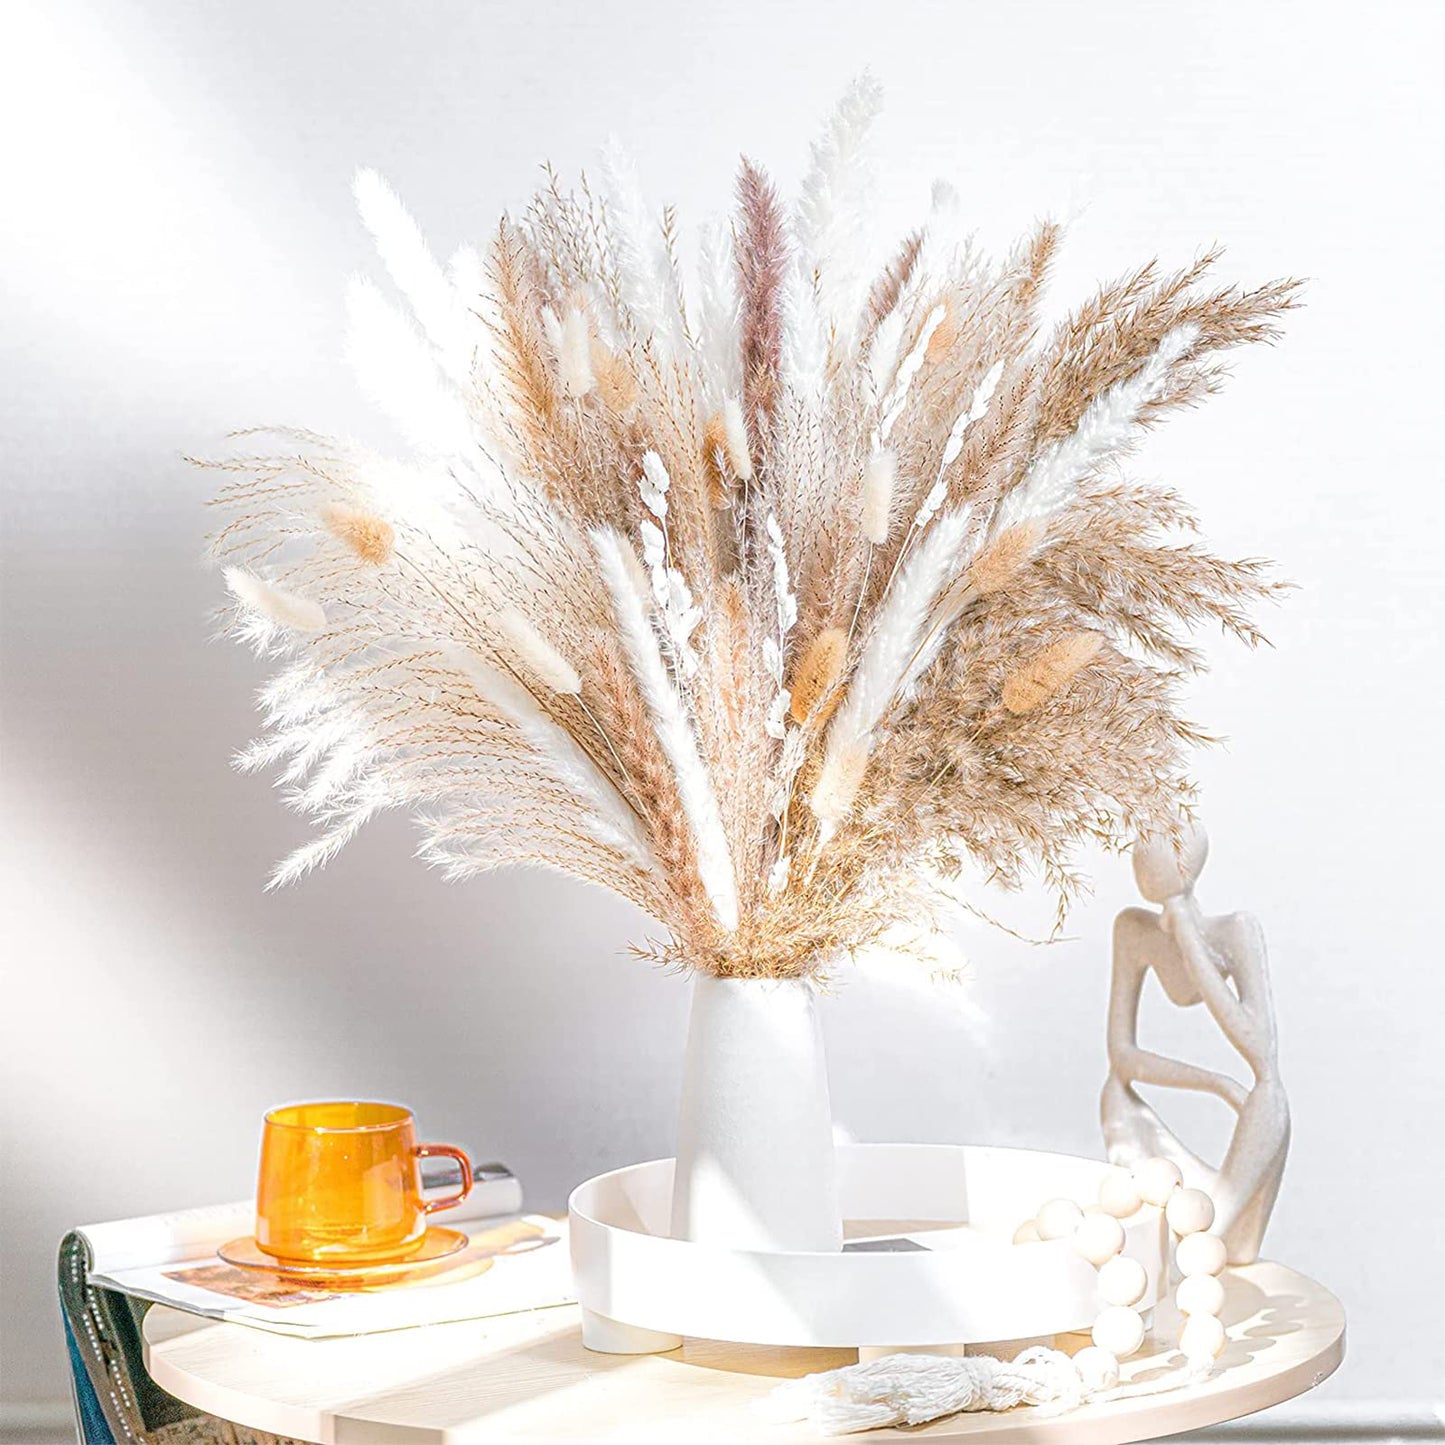 XBLDS Natural Pampas Grass - 60 Pieces. Pampas Grass Large 45 CM, Dried Flowers Bouquet for Vases, Wedding Decorations & Home Decor. Fluffy Pampas Grass Ideal for Outdoor & Indoor Decorations